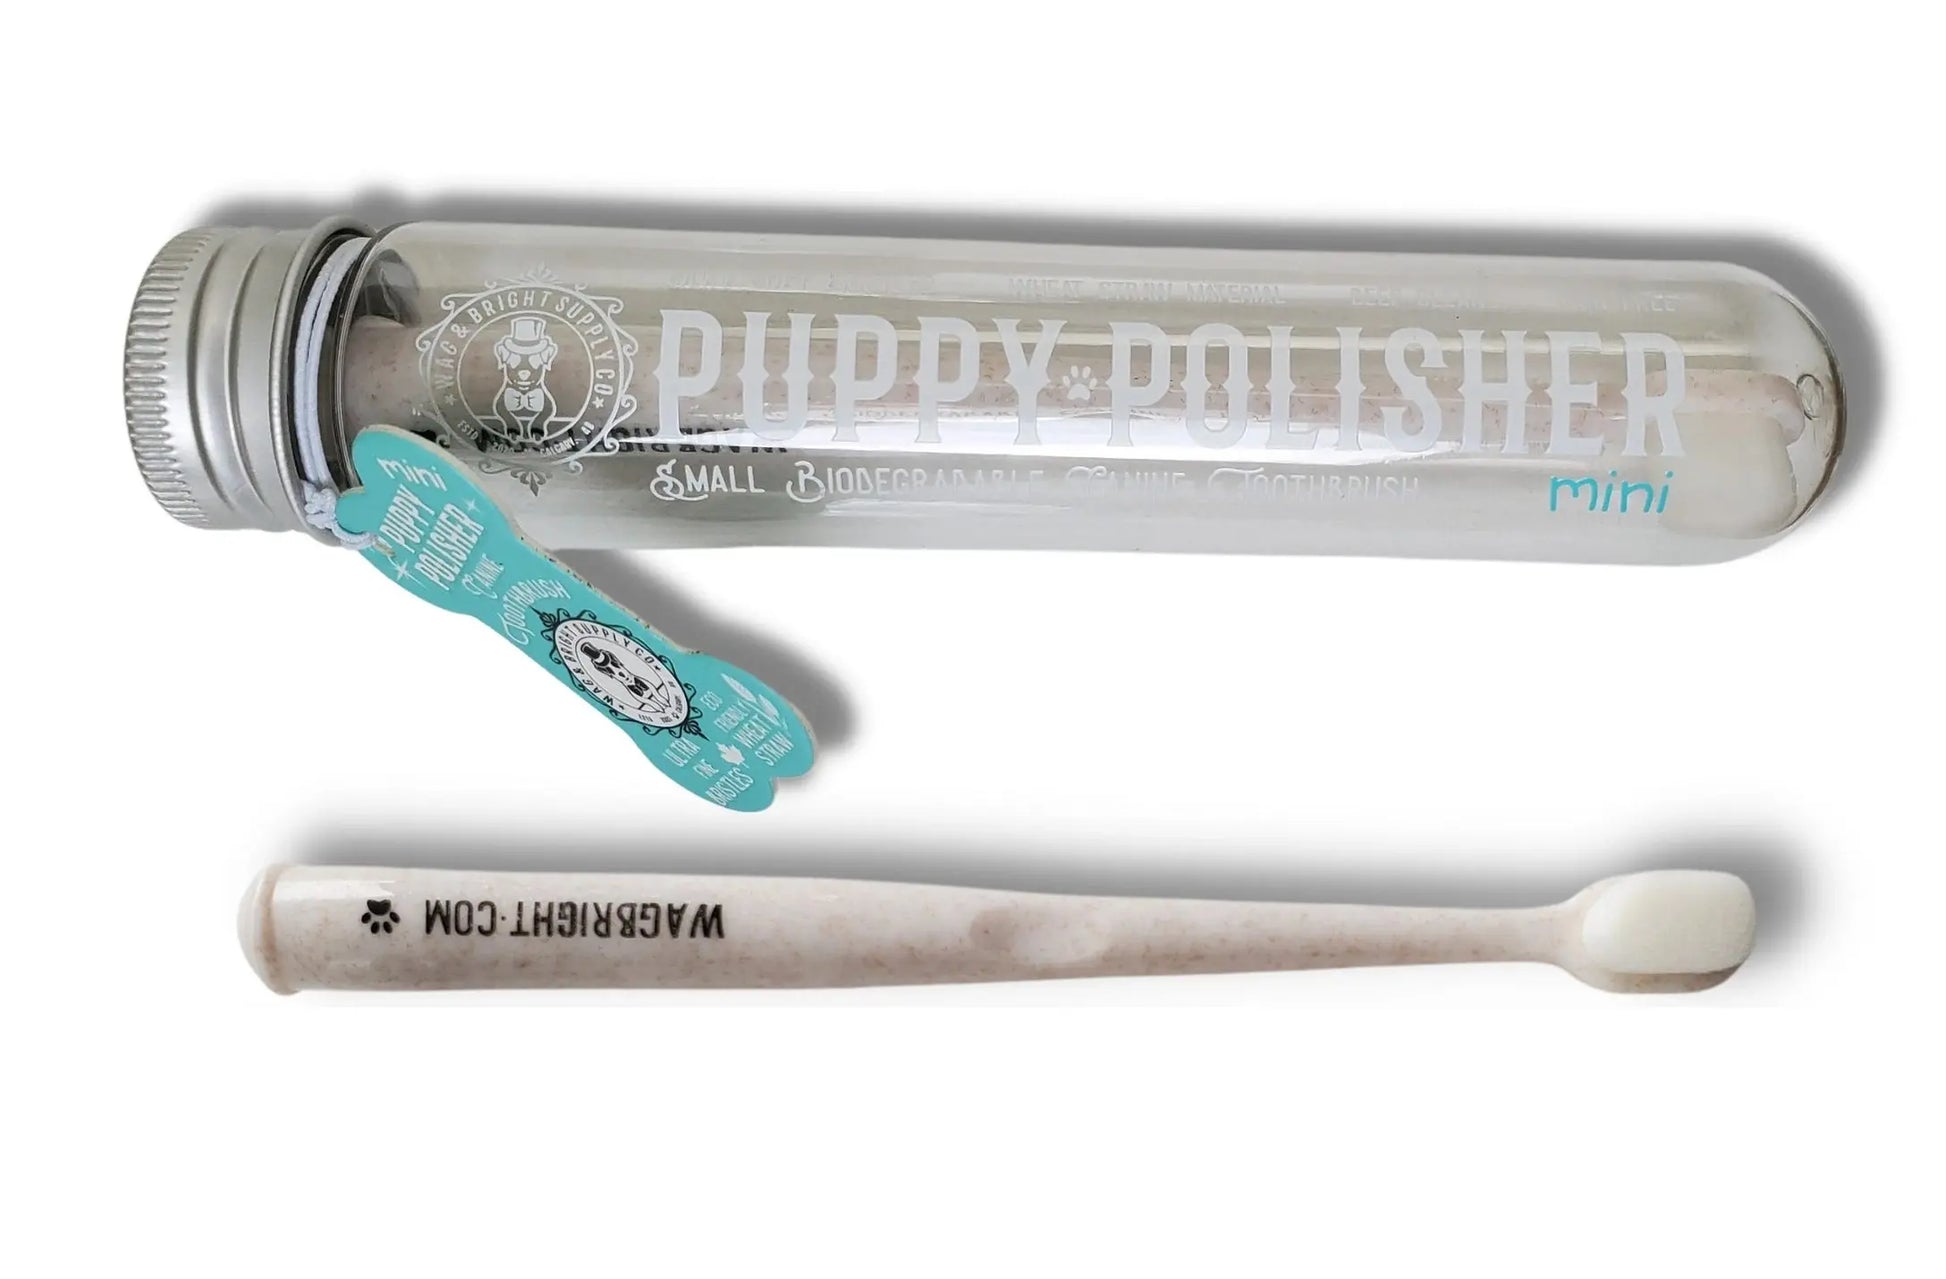 Puppy Polisher Toothbrush S WAG & BRIGHT